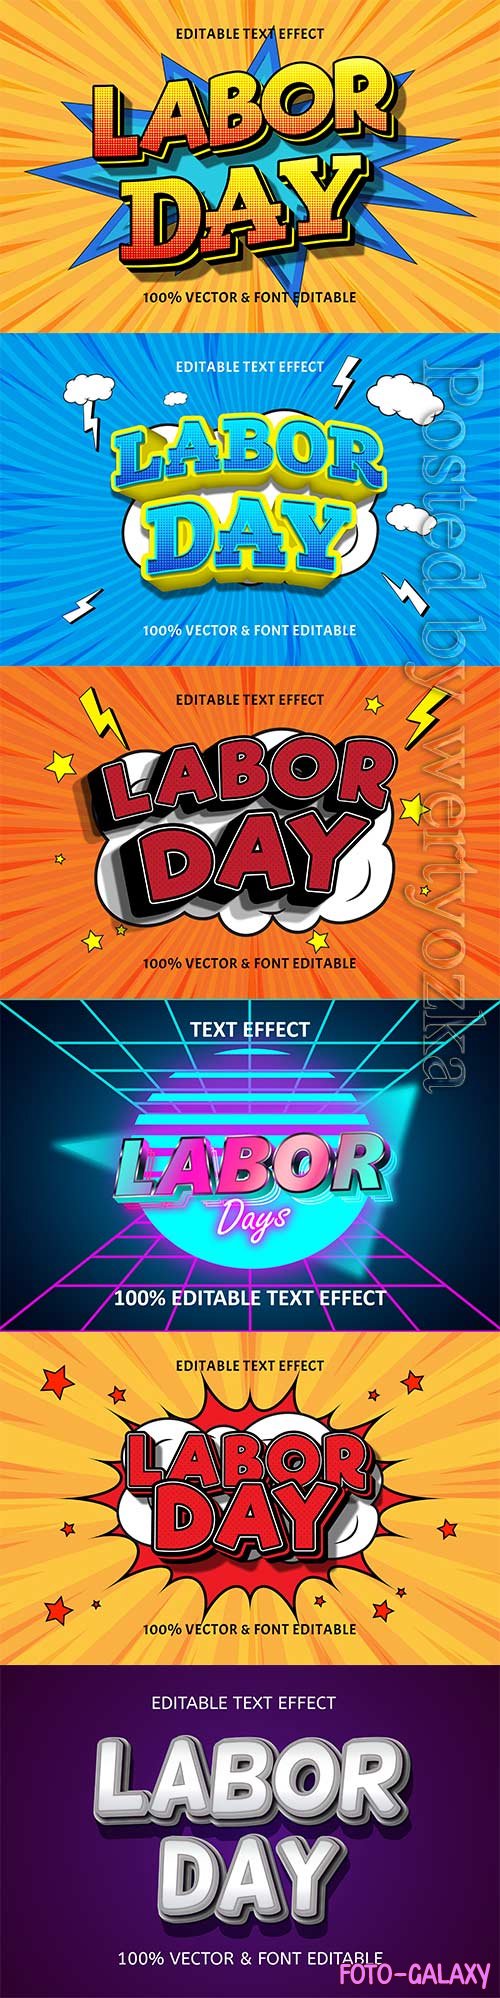 Labor day editable text effect vol 11